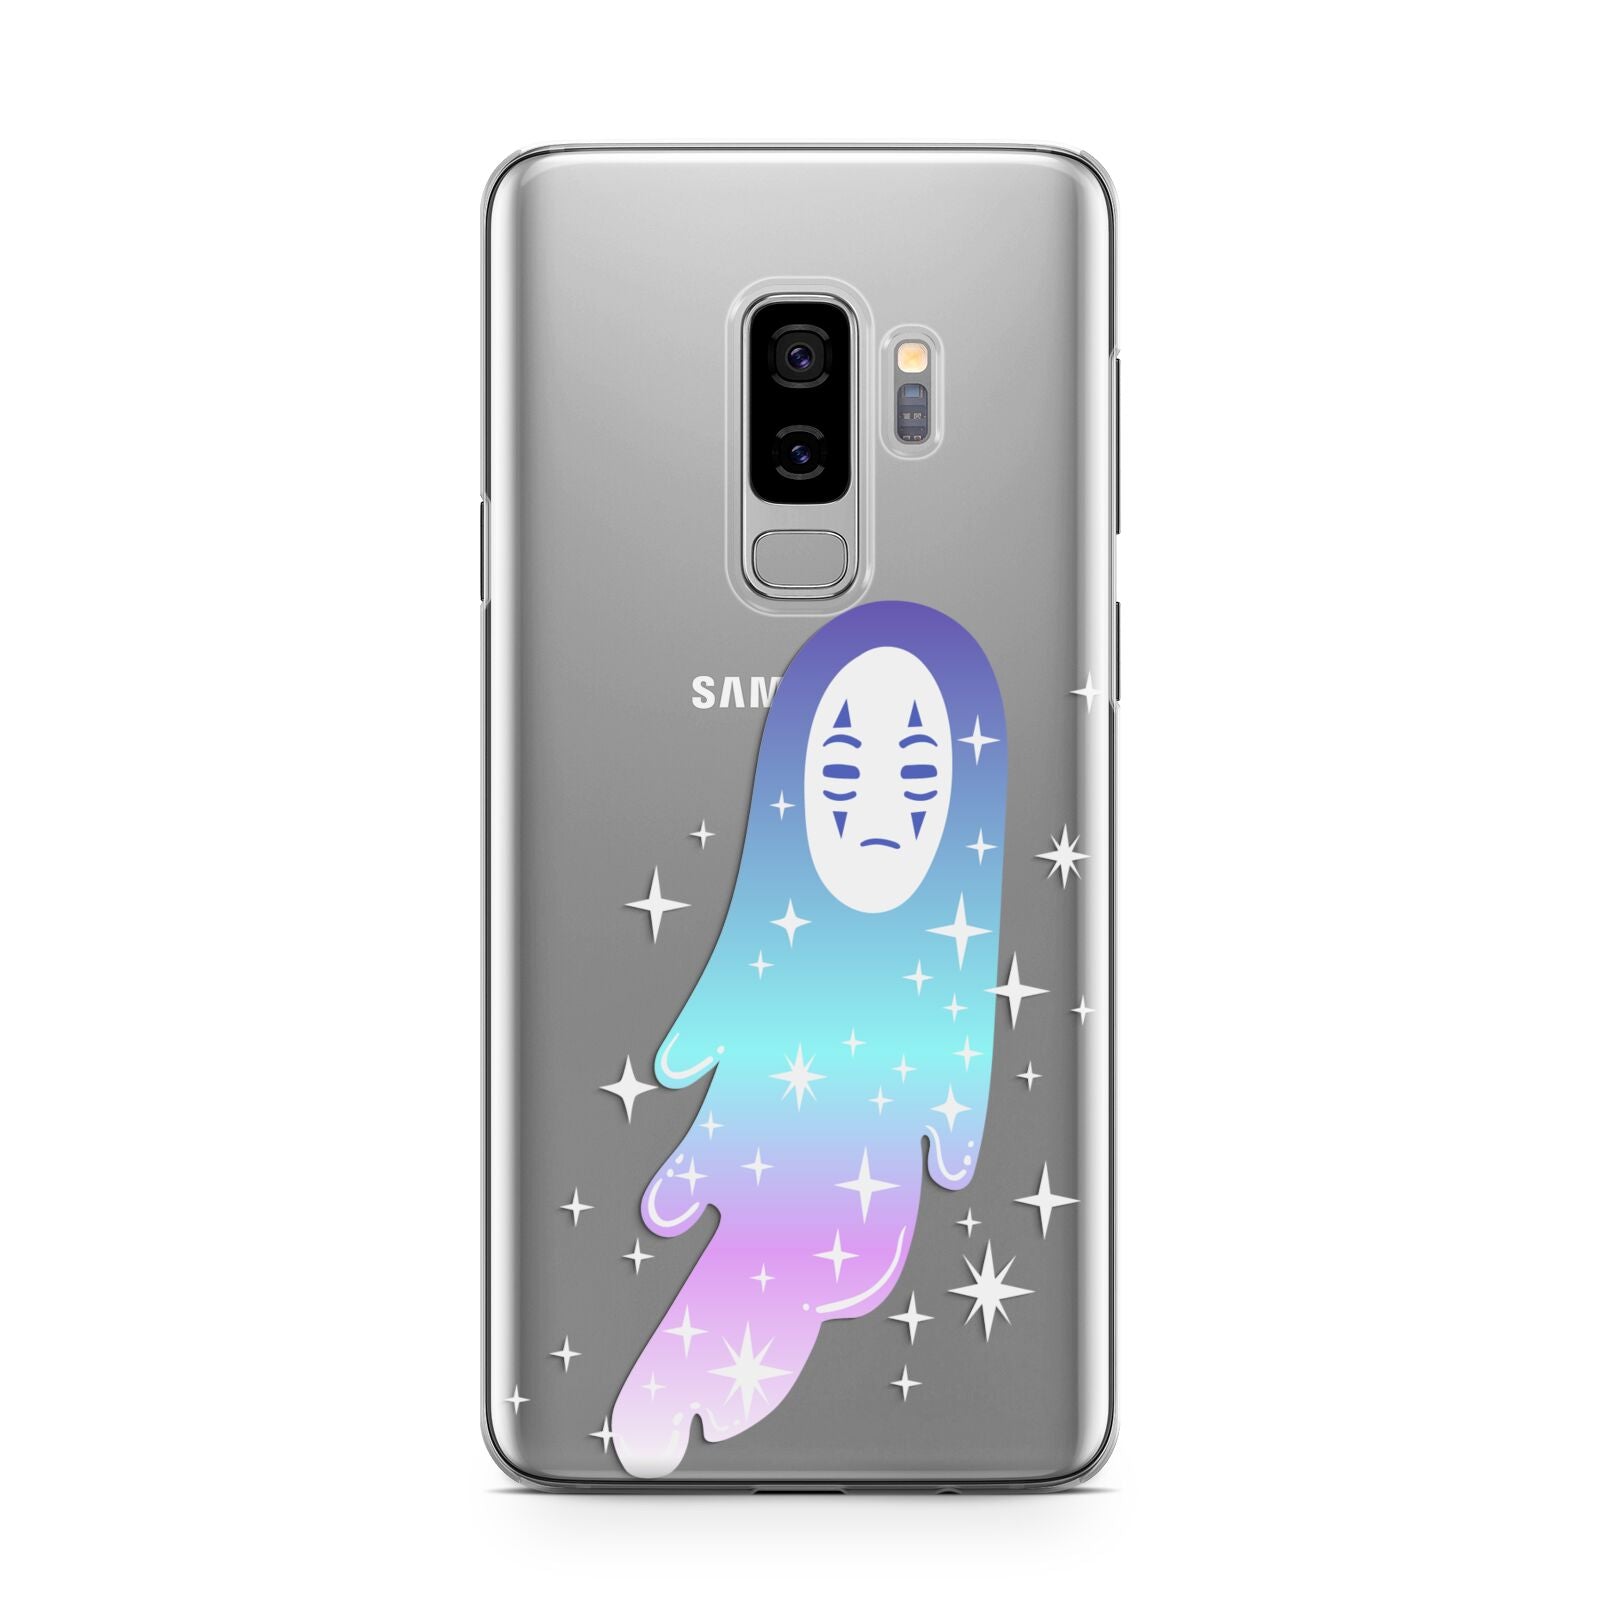 Starry Spectre Samsung Galaxy S9 Plus Case on Silver phone